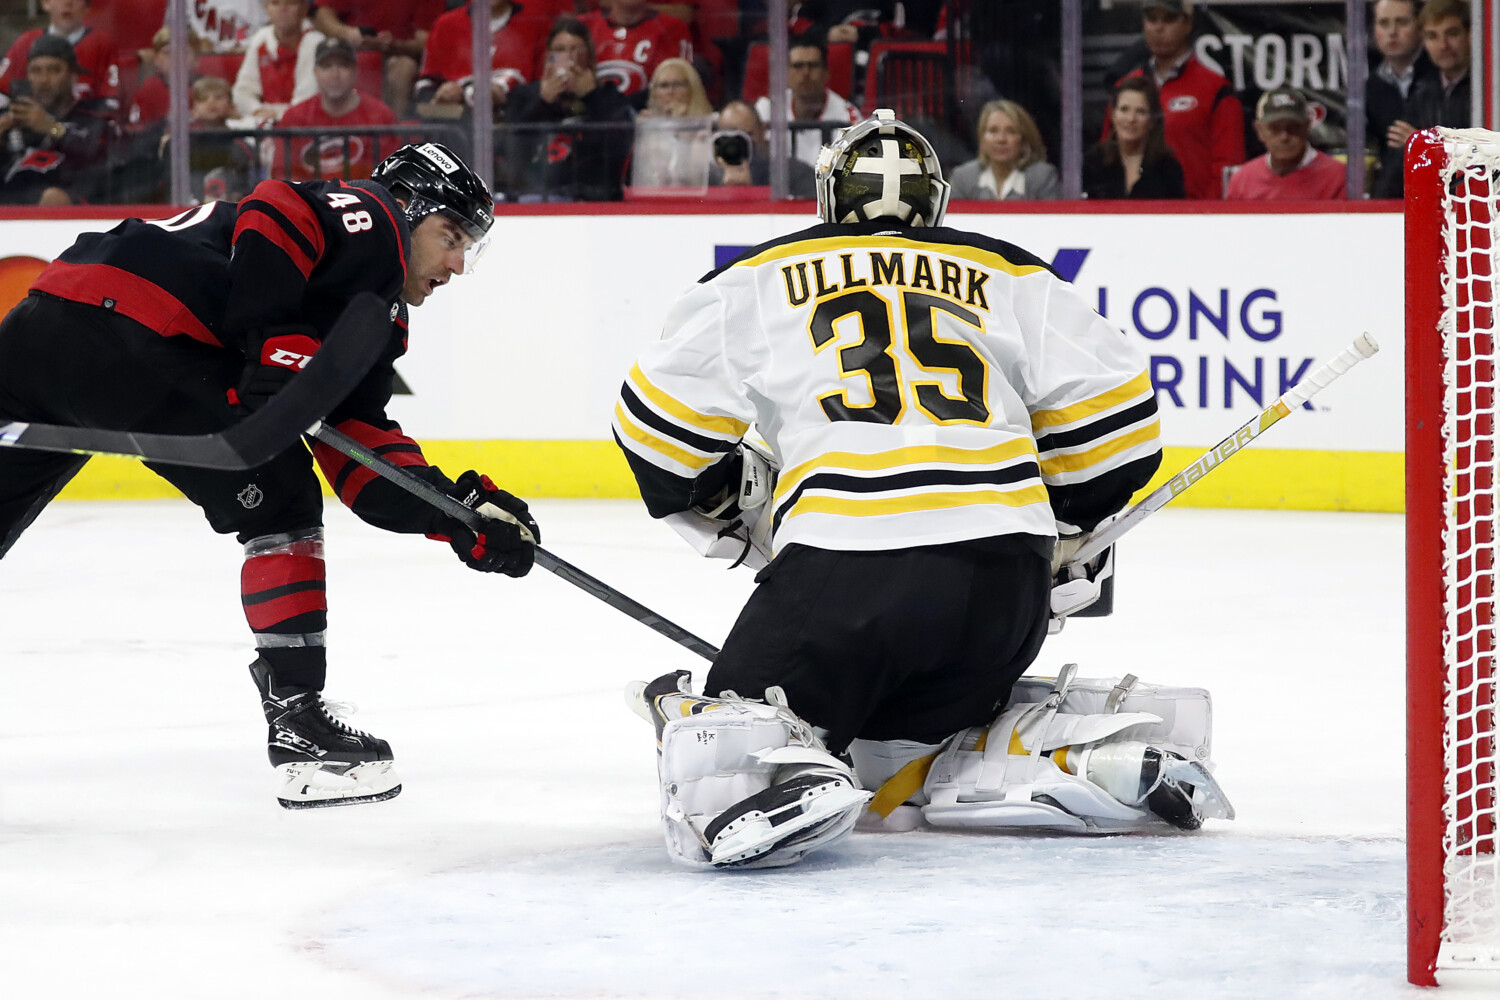 Forbort injury will keep him out at least until Bruins start the playoffs